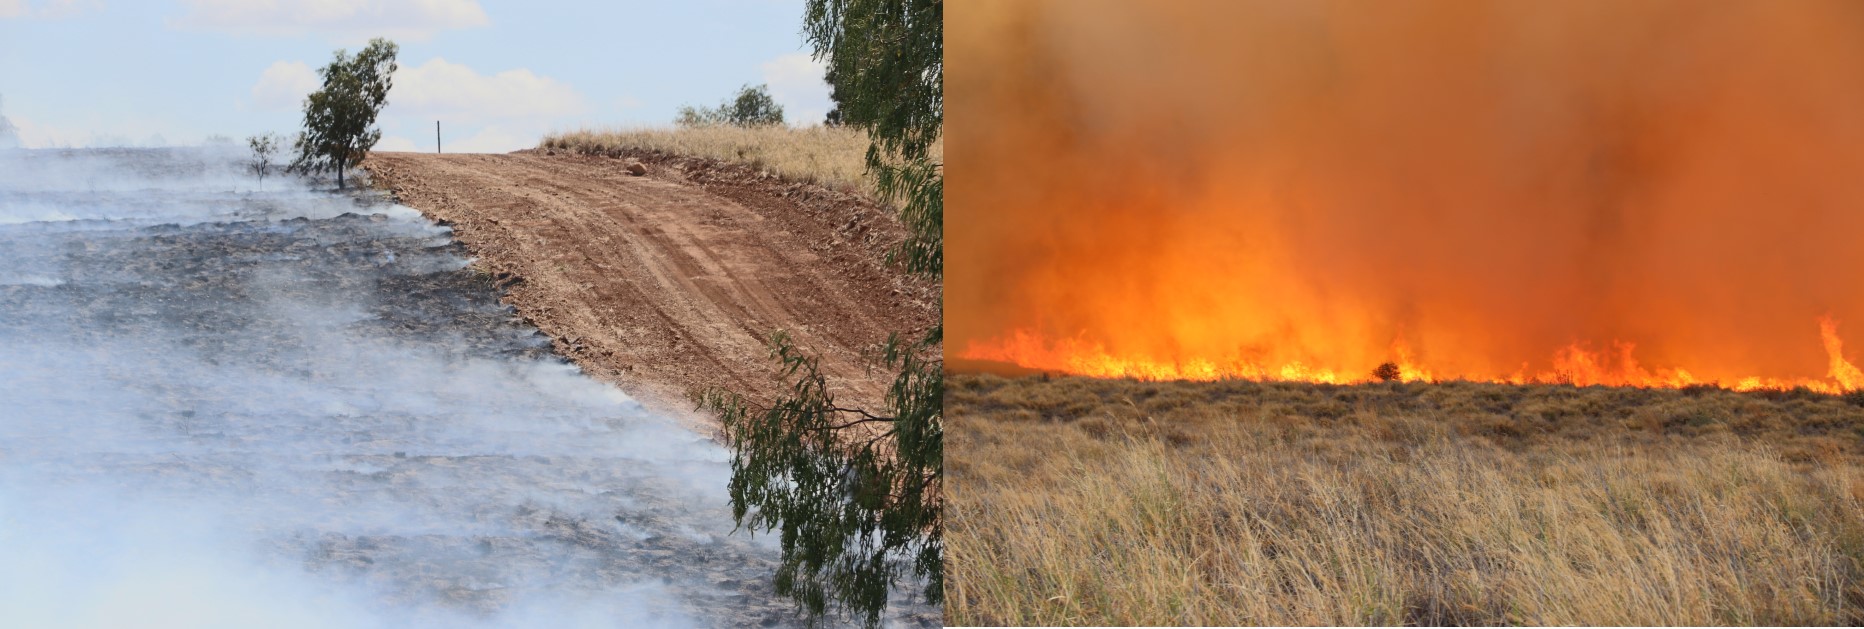 before and after images of bushland on fire 